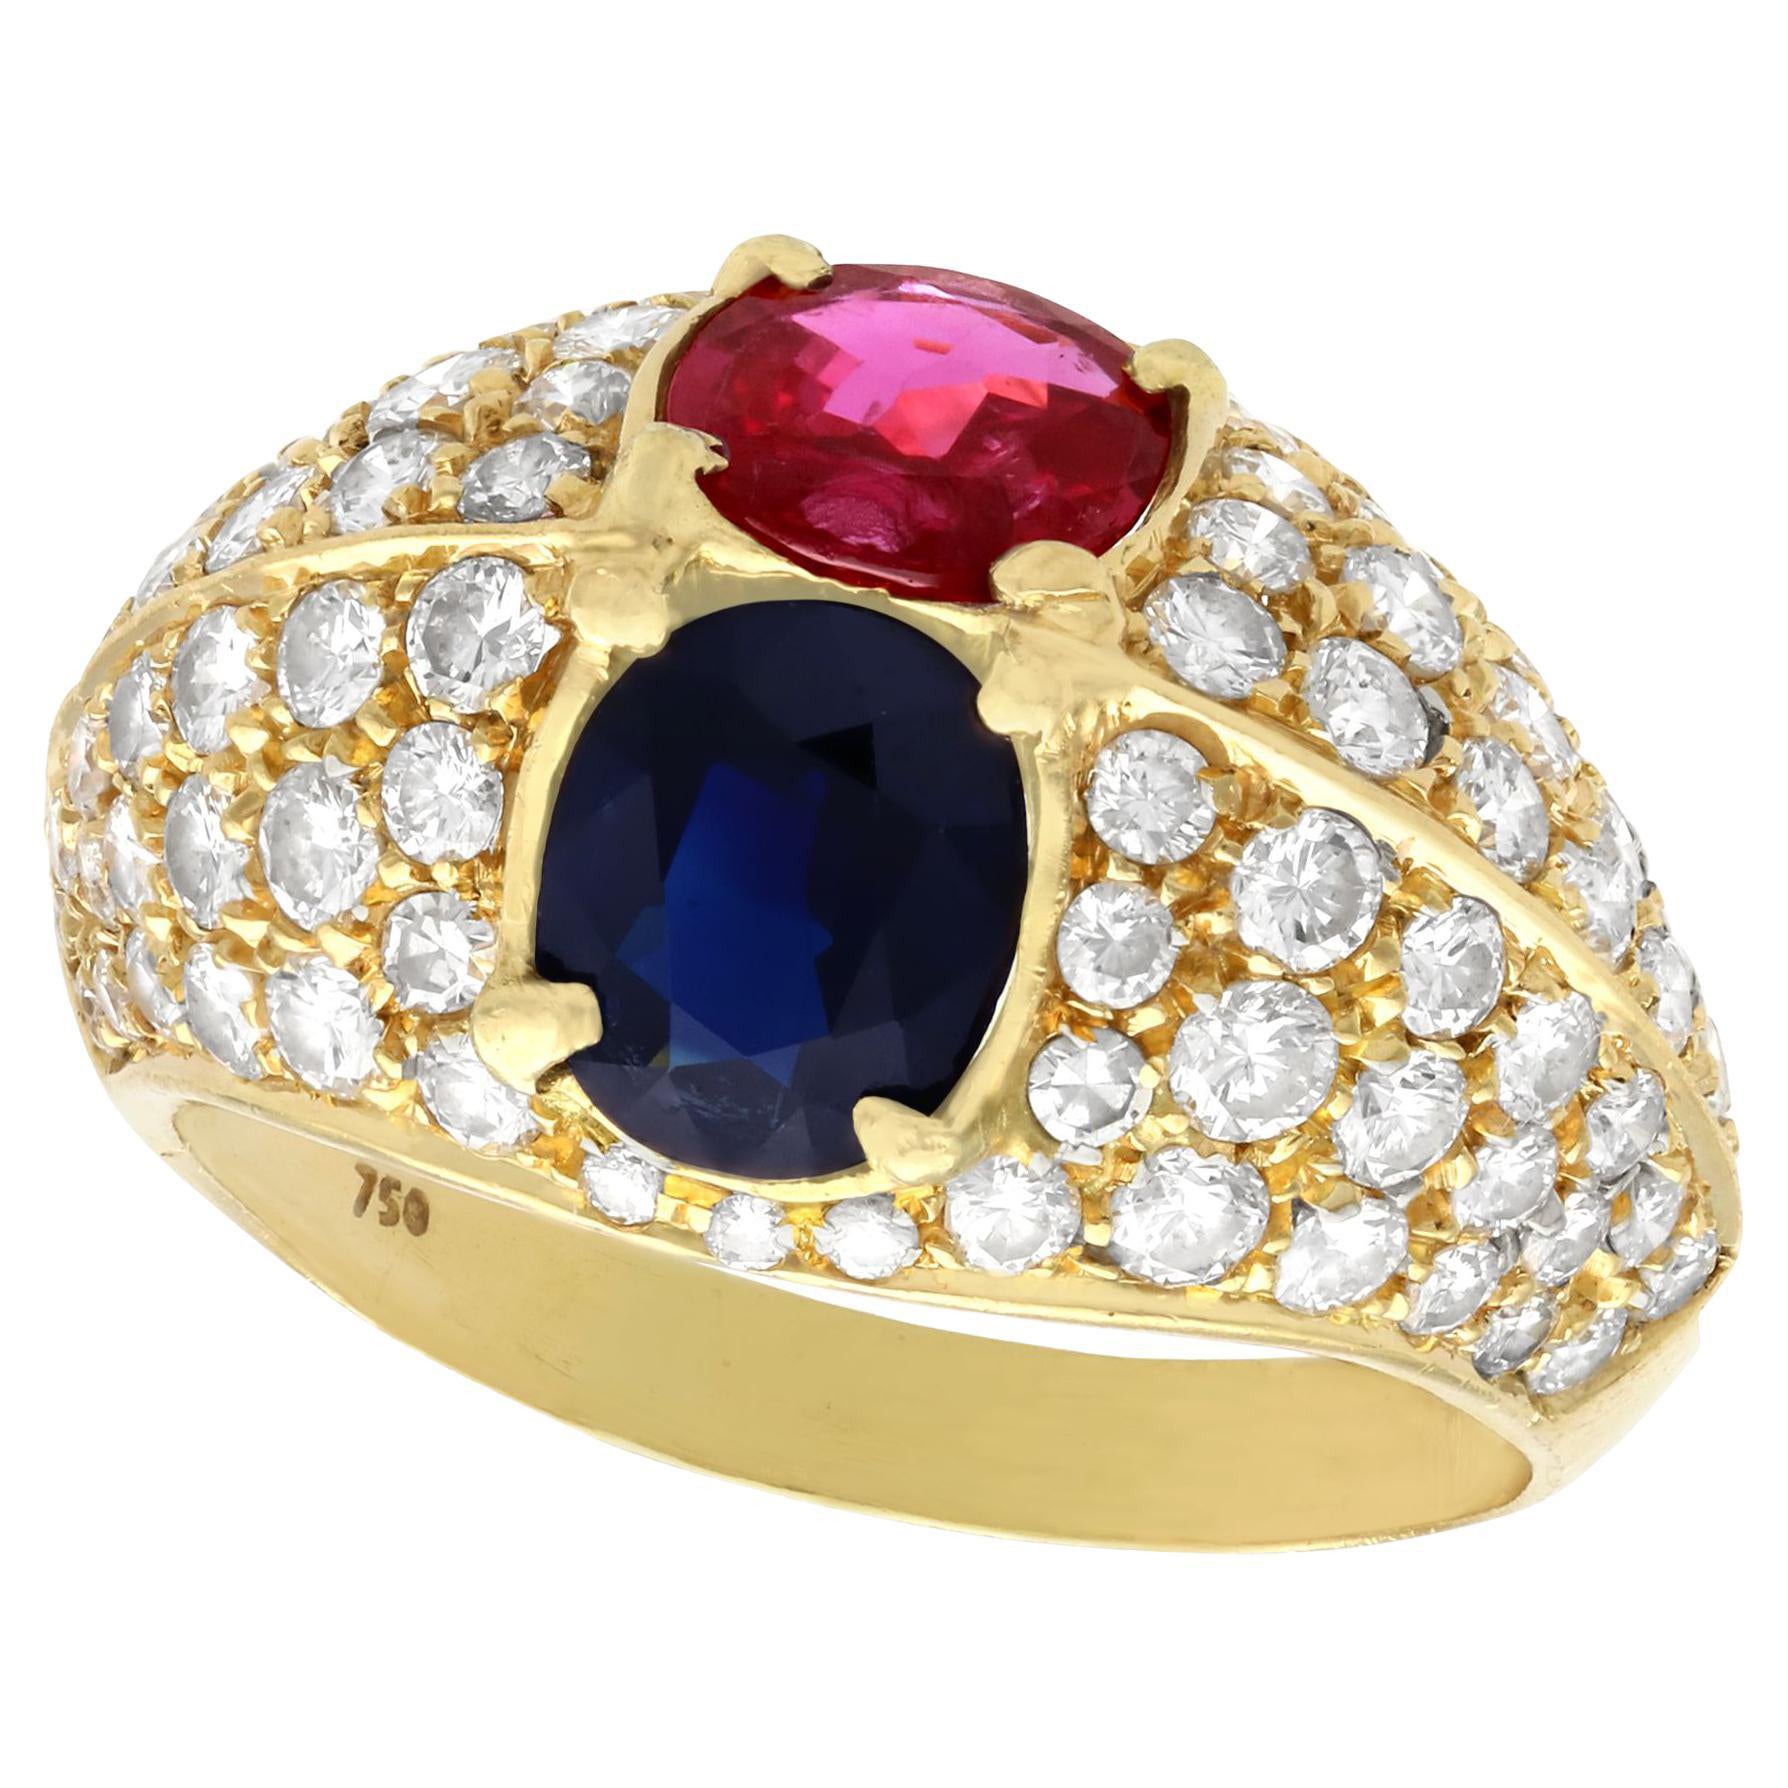 1.35 Carat Ruby and 1.28 Carat Sapphire 1.75 Carat Diamond and Yellow Gold Ring For Sale